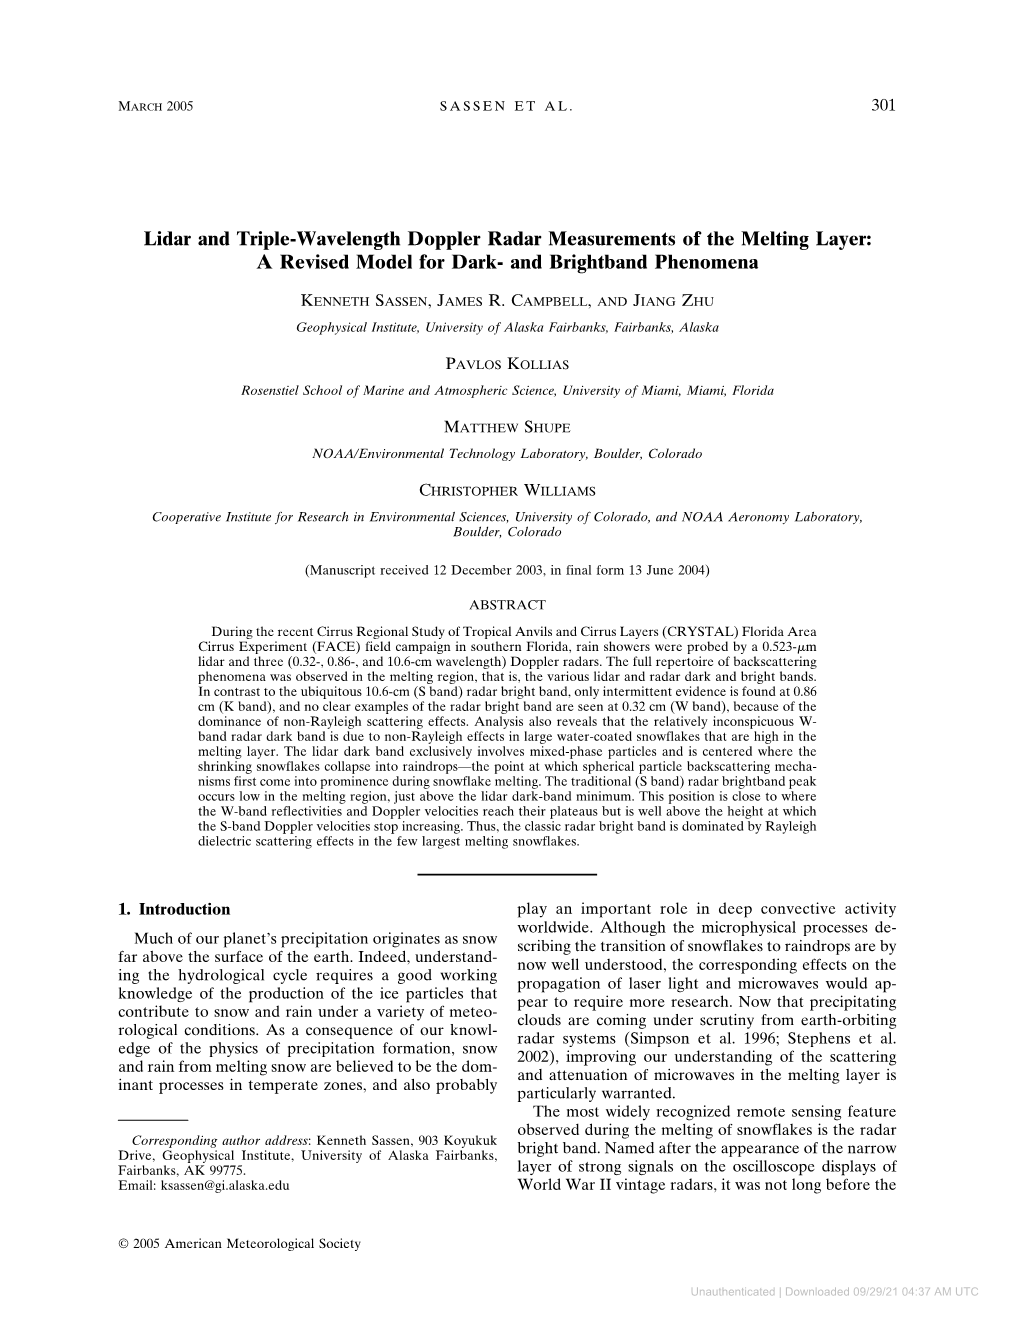 Lidar and Triple-Wavelength Doppler Radar Measurements of the Melting Layer: a Revised Model for Dark- and Brightband Phenomena